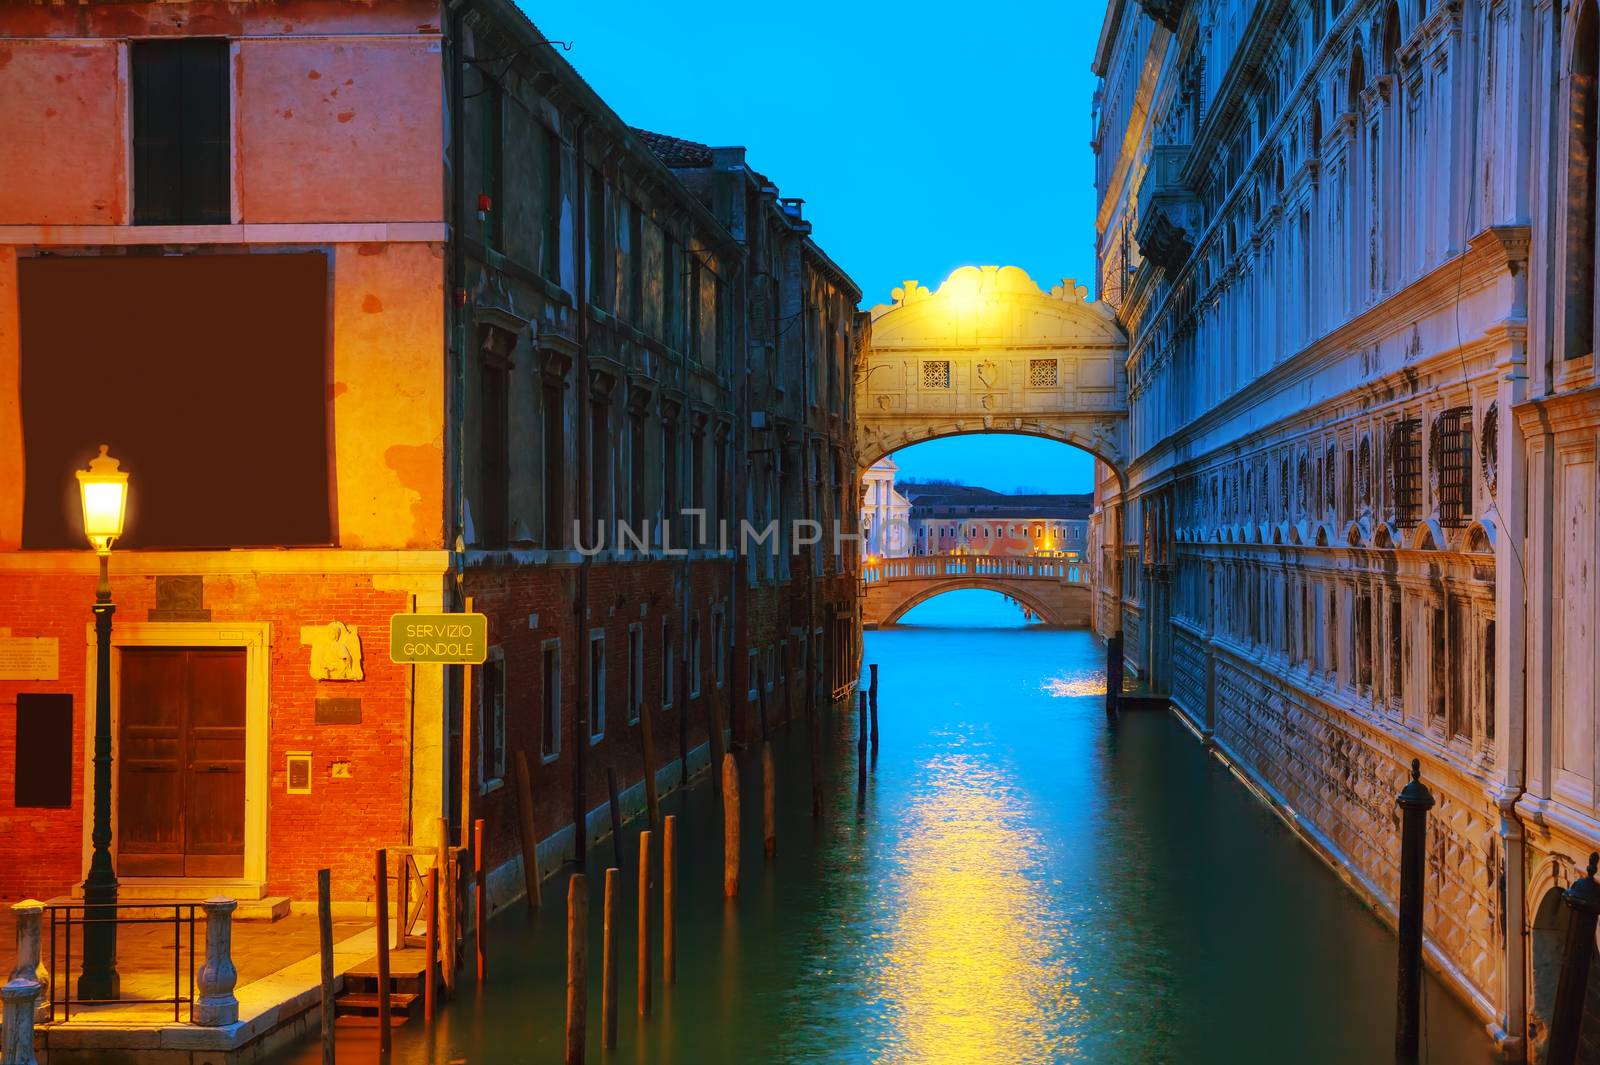 Bridge of sig0hs in Venice, Italy at the night time